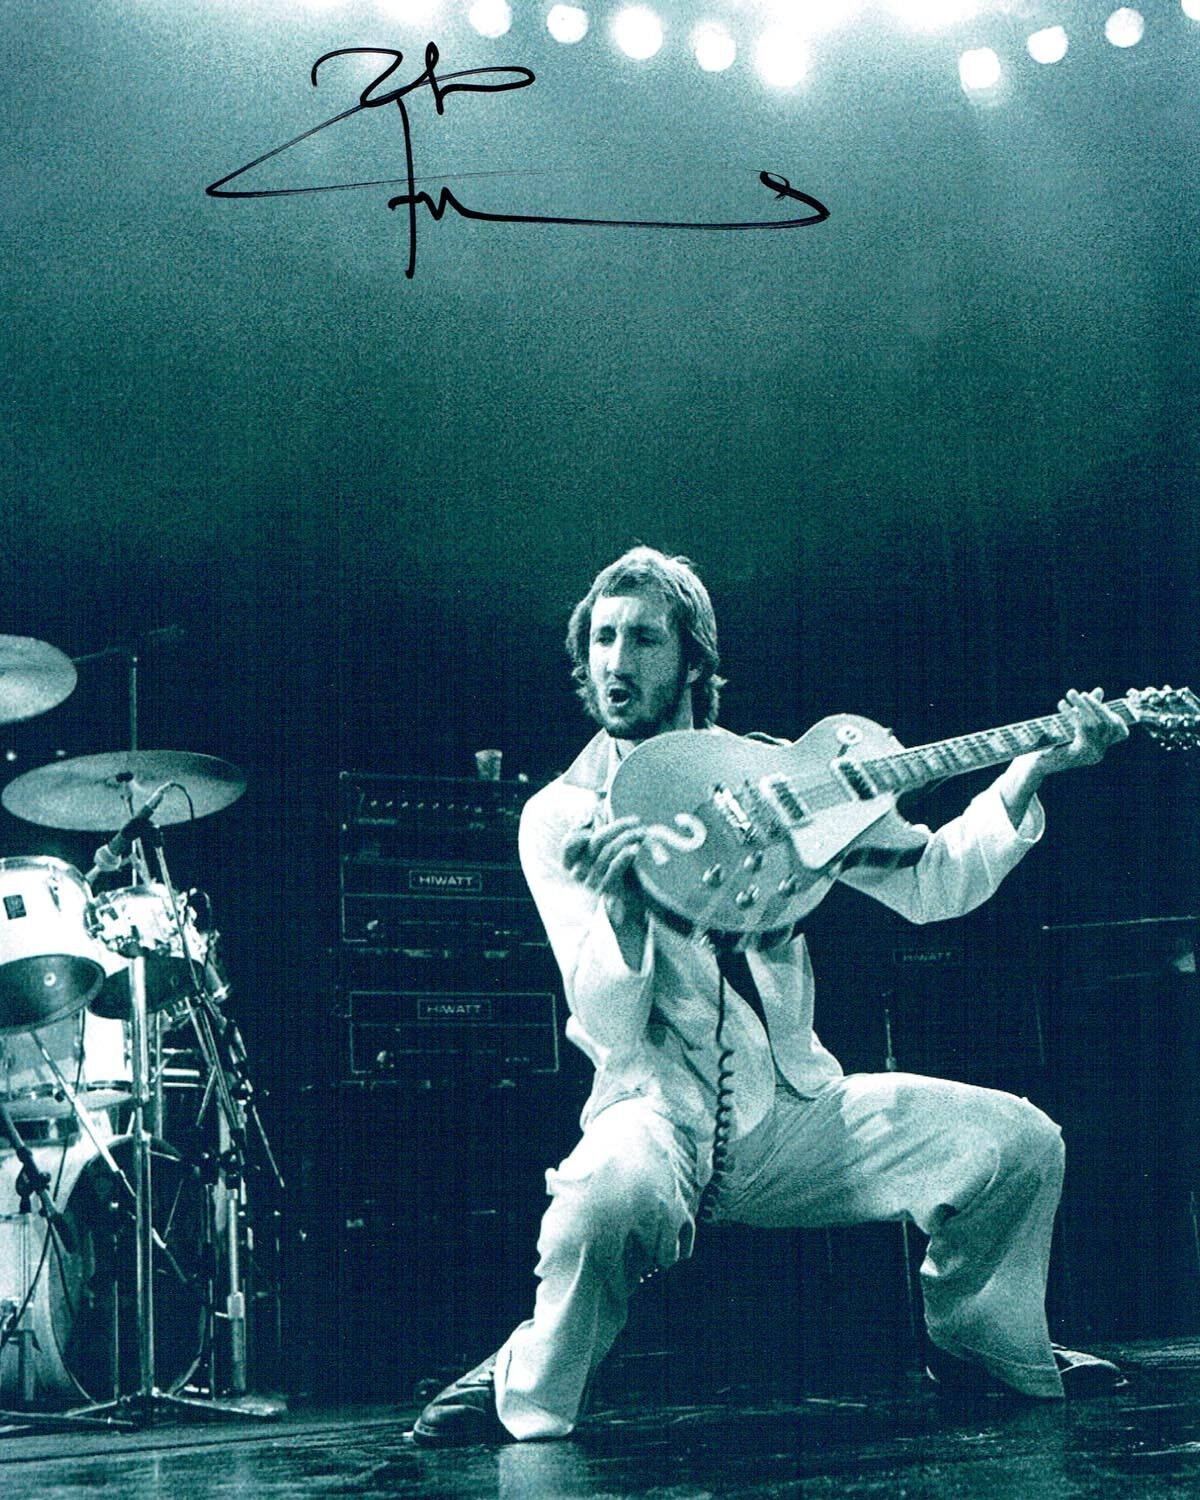 PETE TOWNSHEND The Who SIGNED Autograph 10x8 Photo Poster painting AFTAL COA Rock Legend